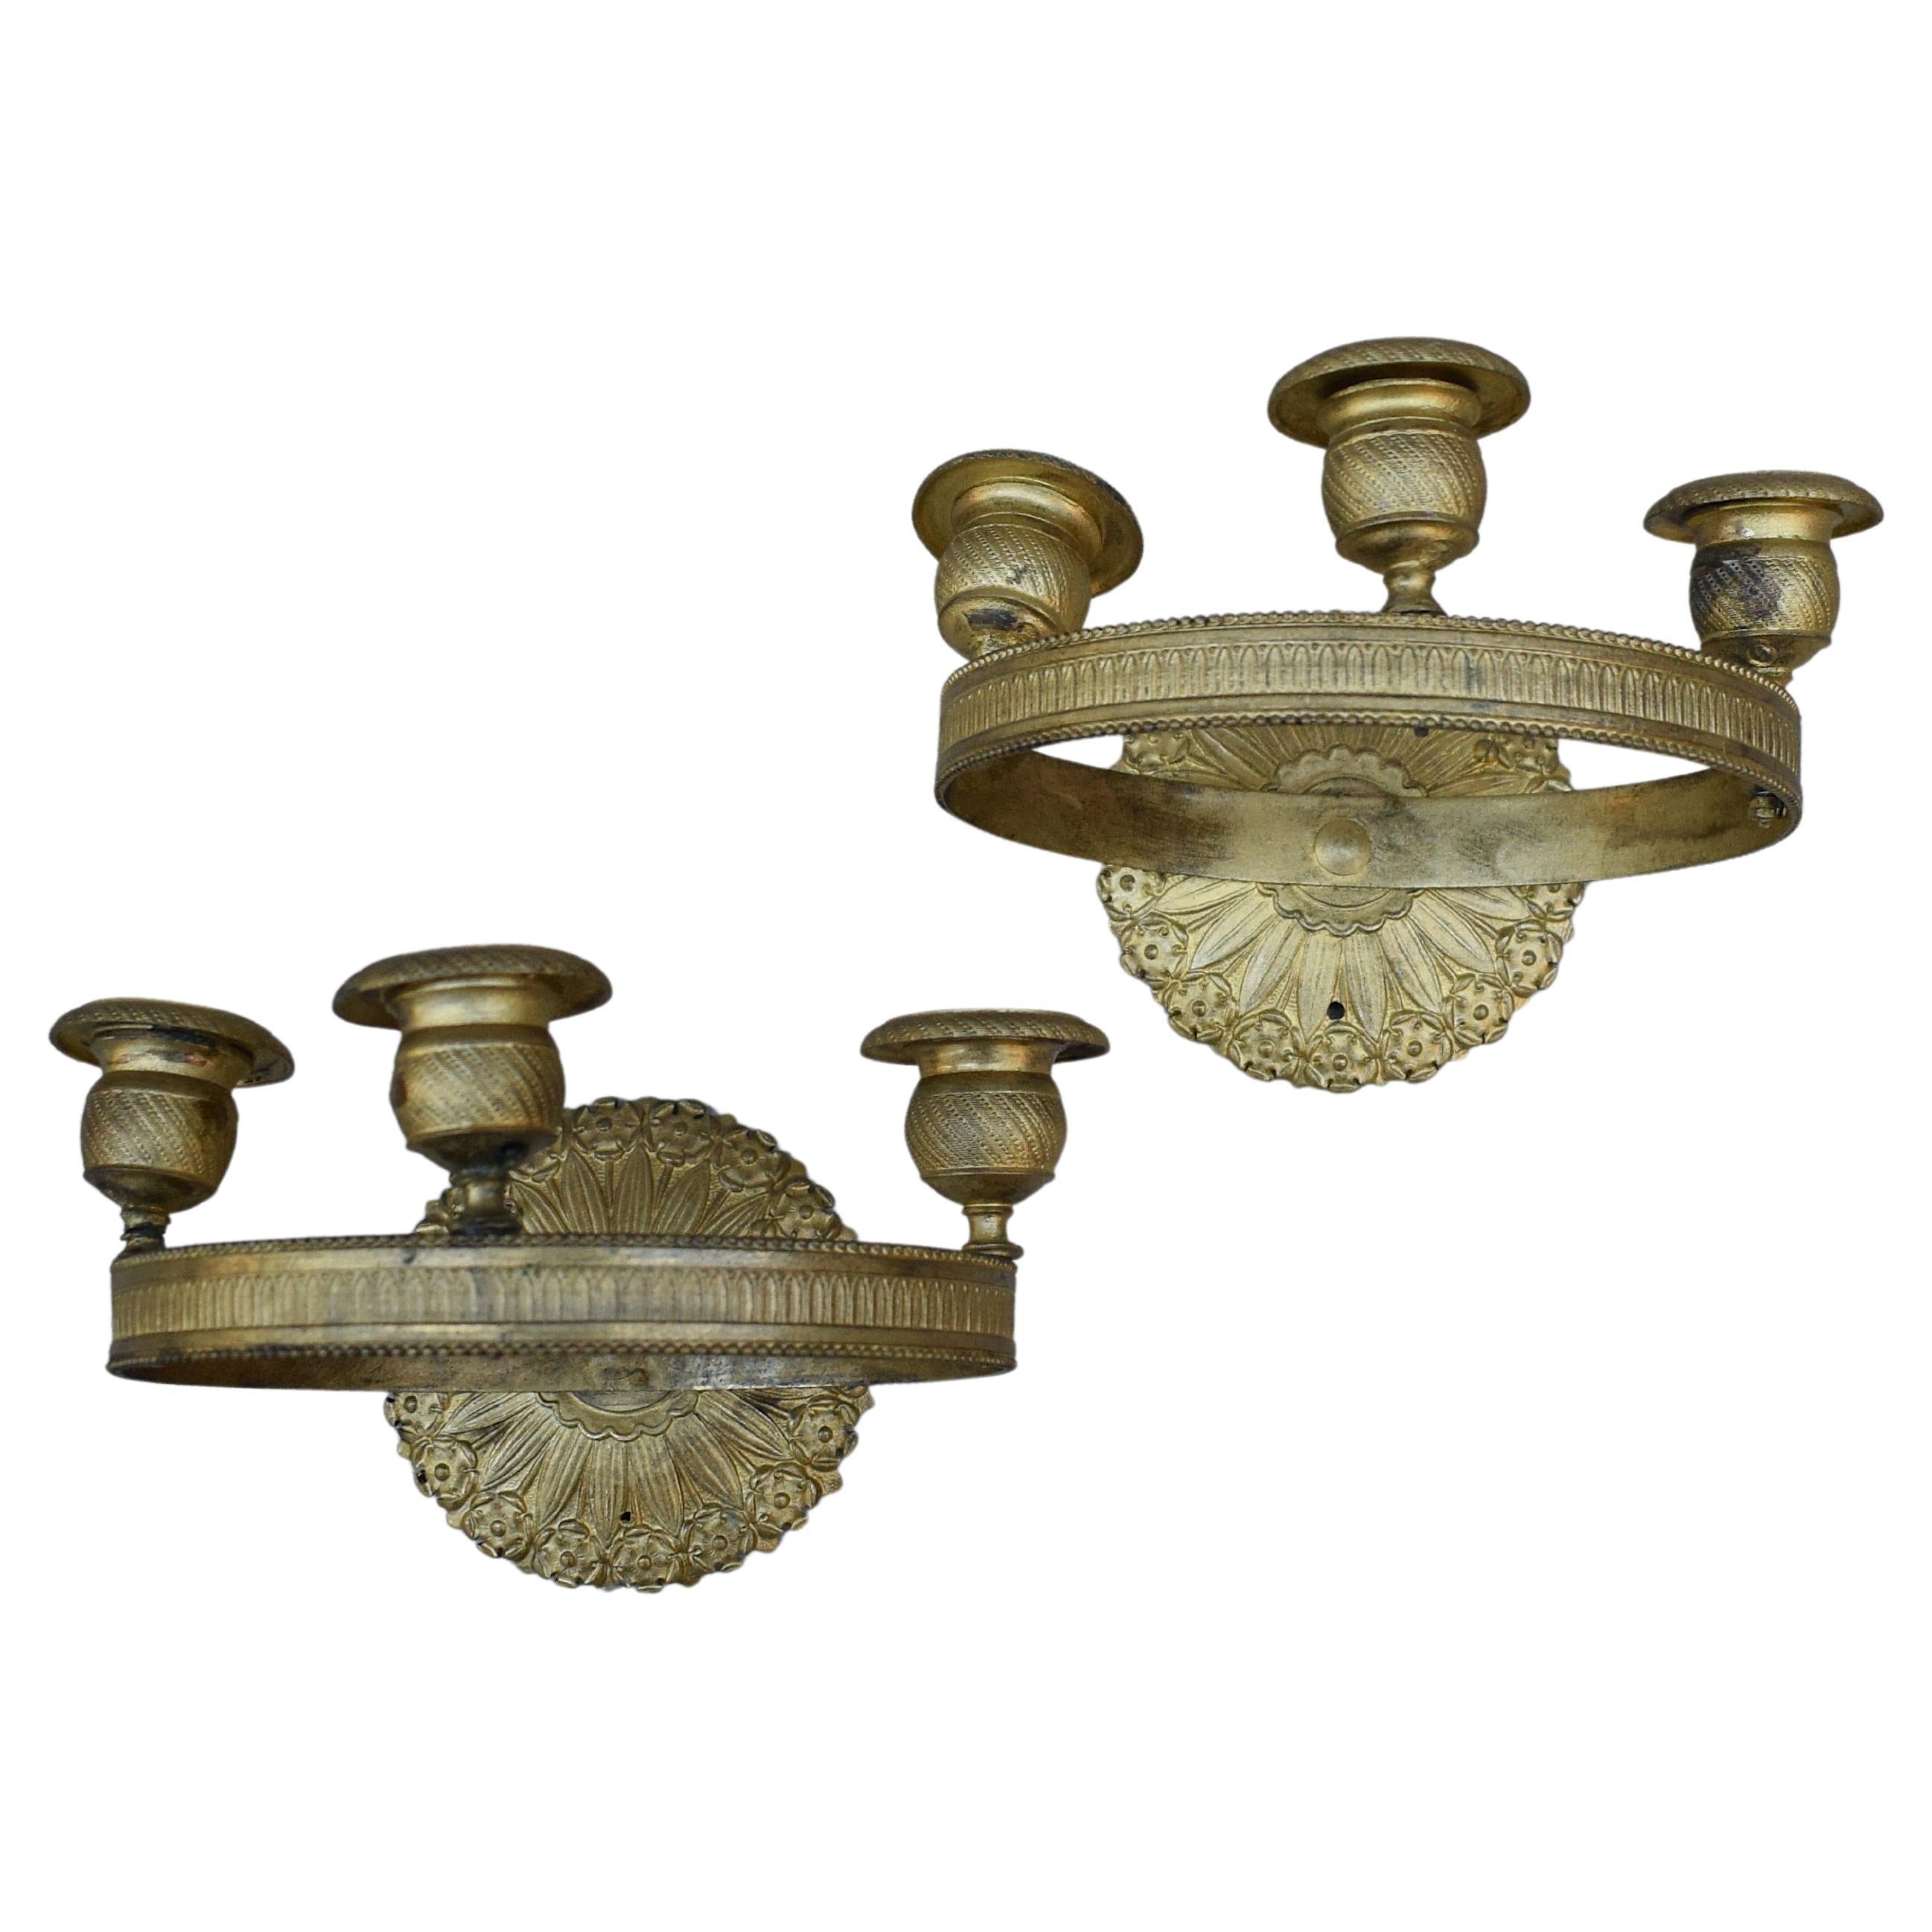 Pair of Empire Gilt-Bronze Wall Sconces with Bronzed Floral Backs